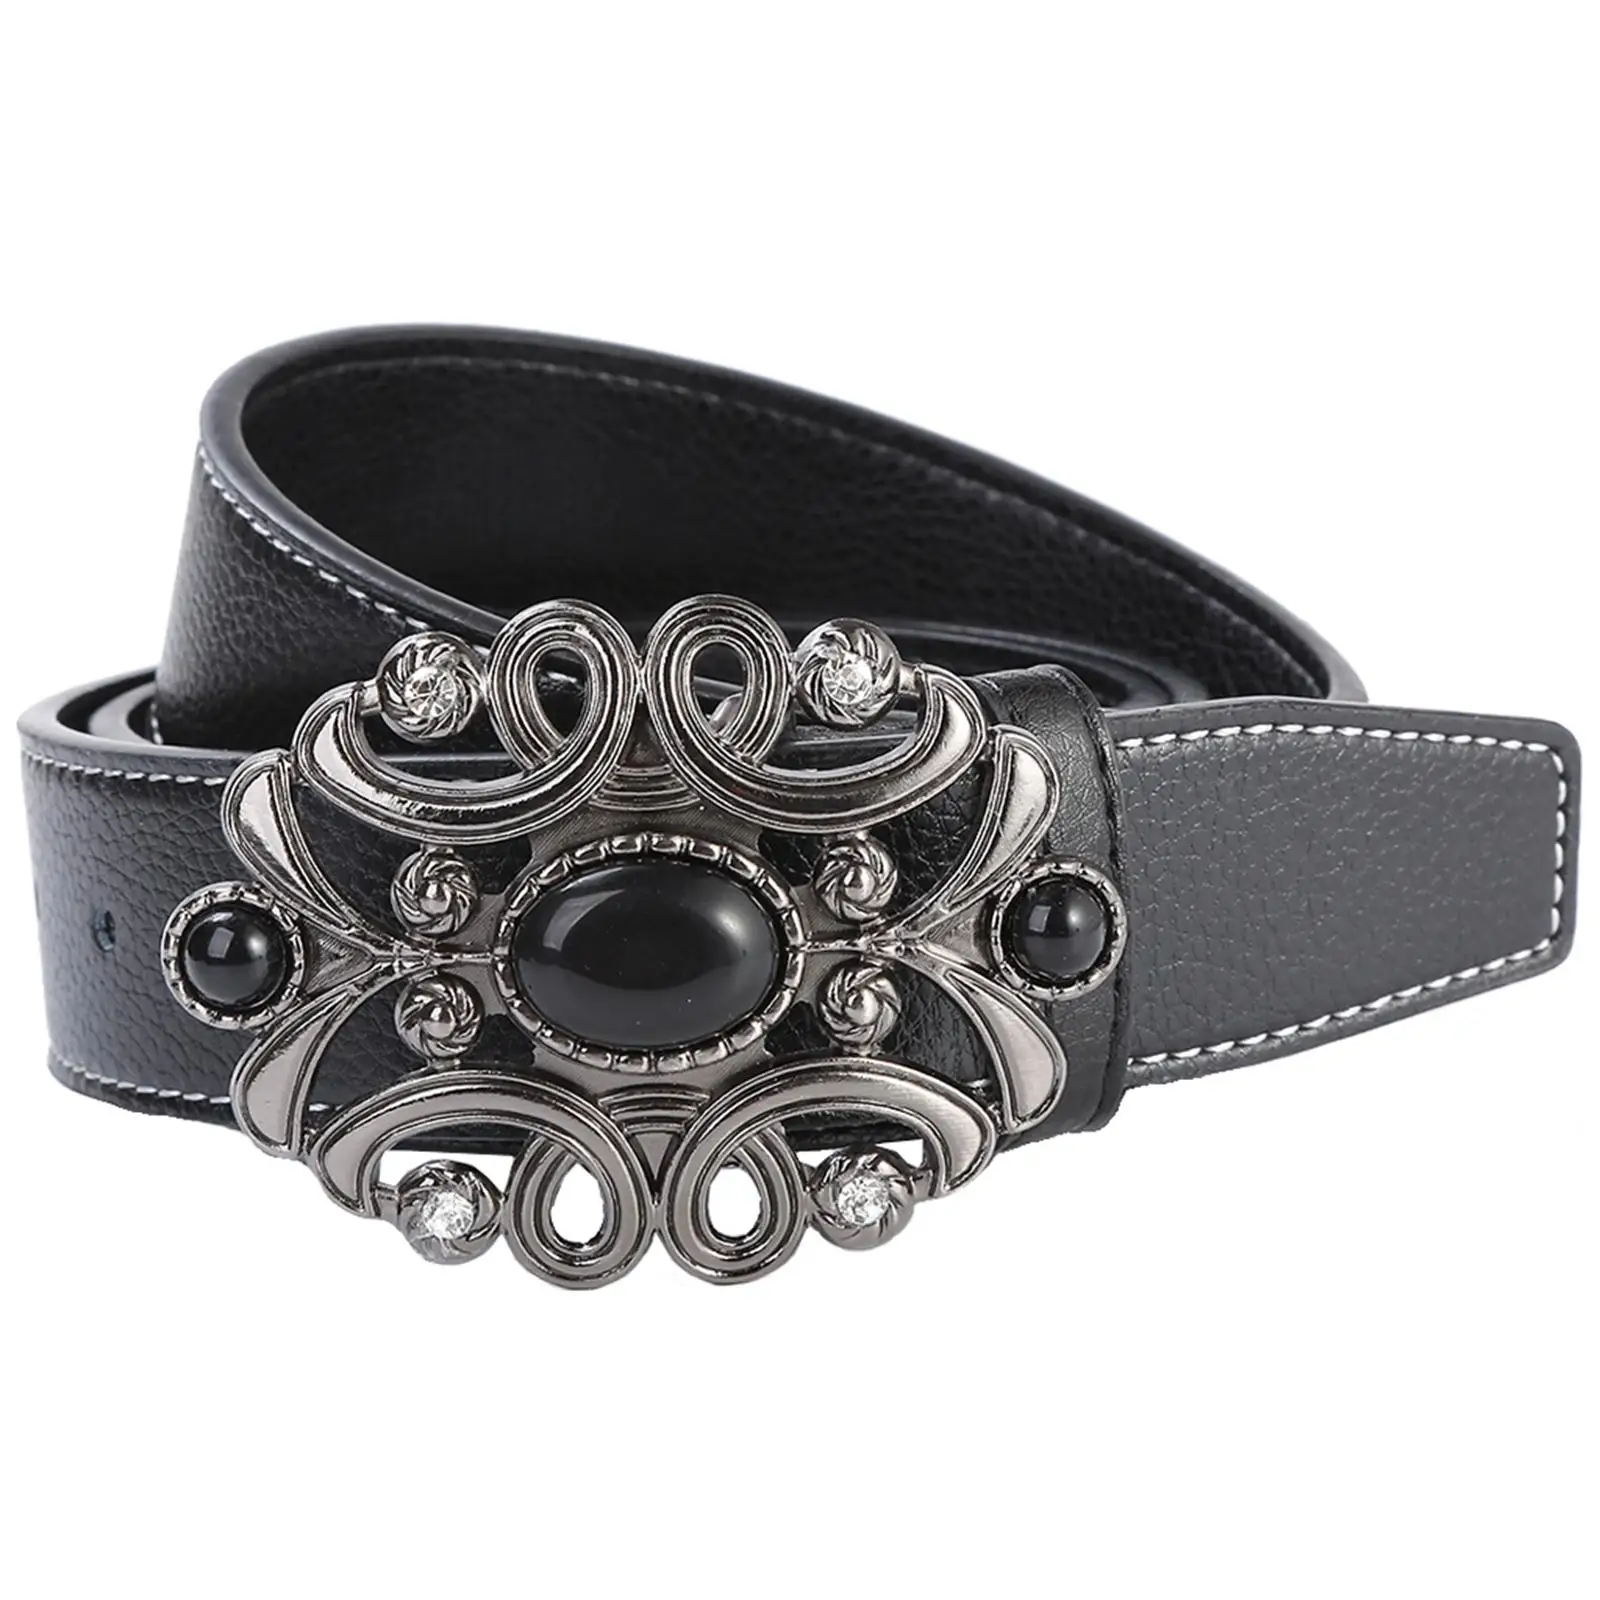 Retro Style Western Belt Floral Engraved Buckle Belt Hollow for Father Women Gift